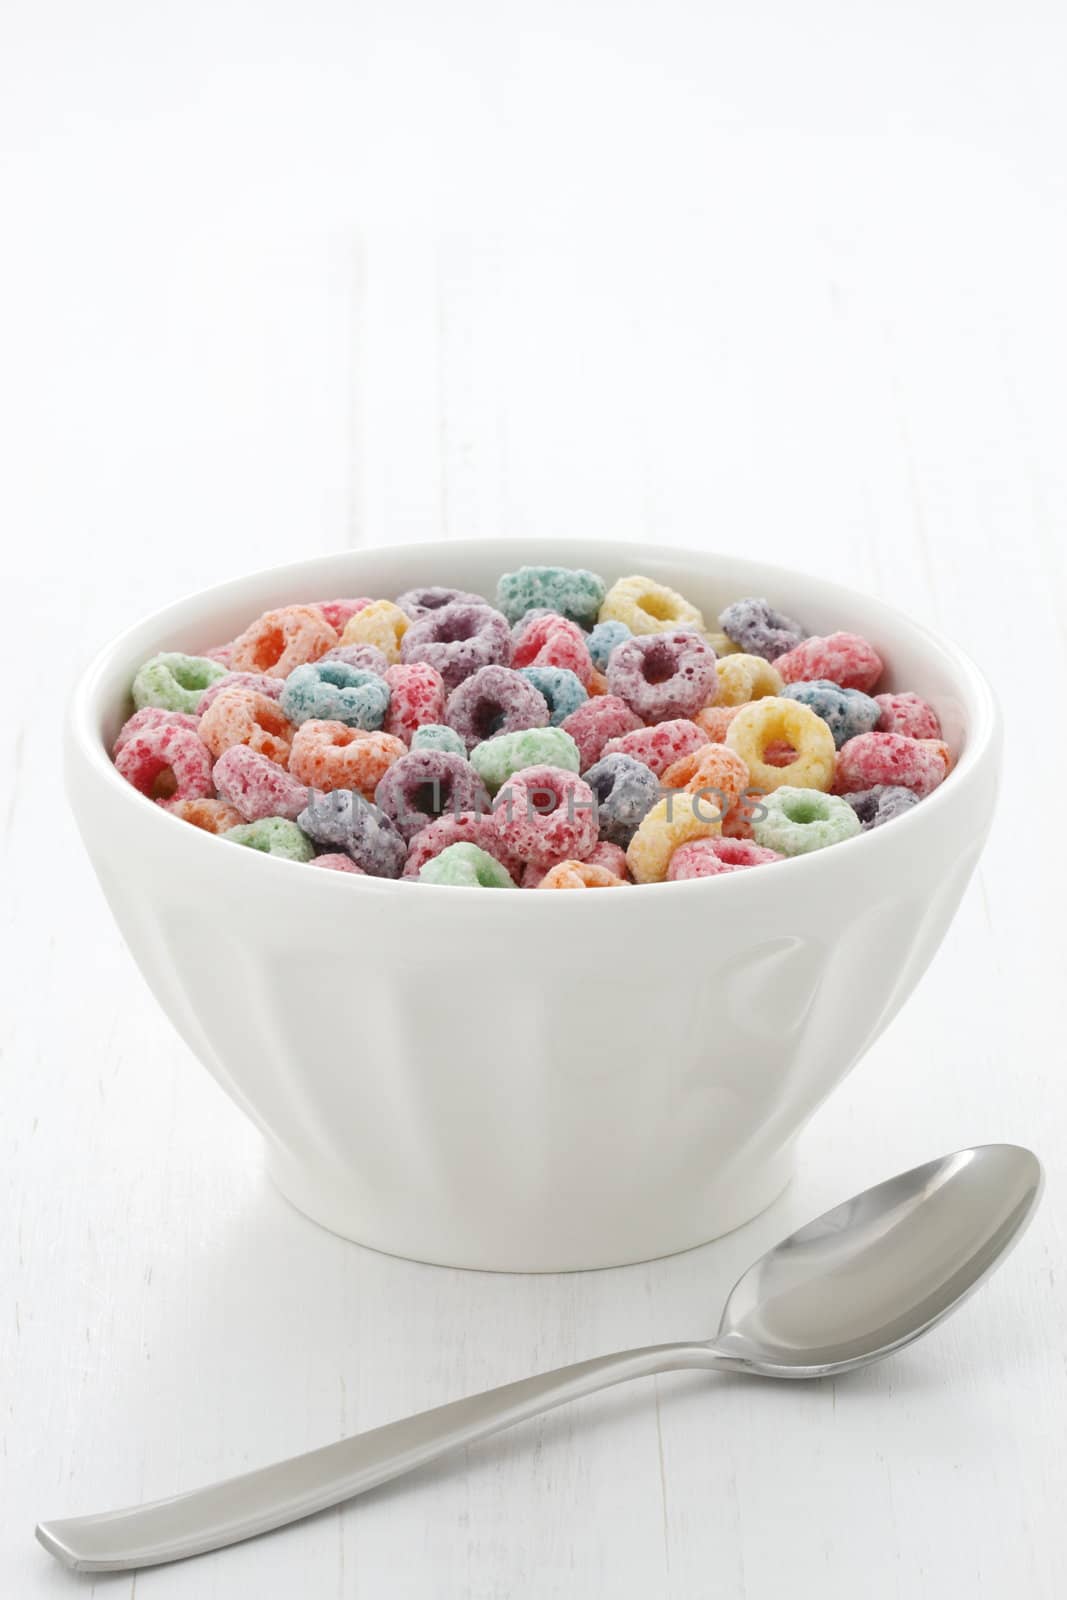 Delicious kids cereal loops with a fruit flavor by tacar